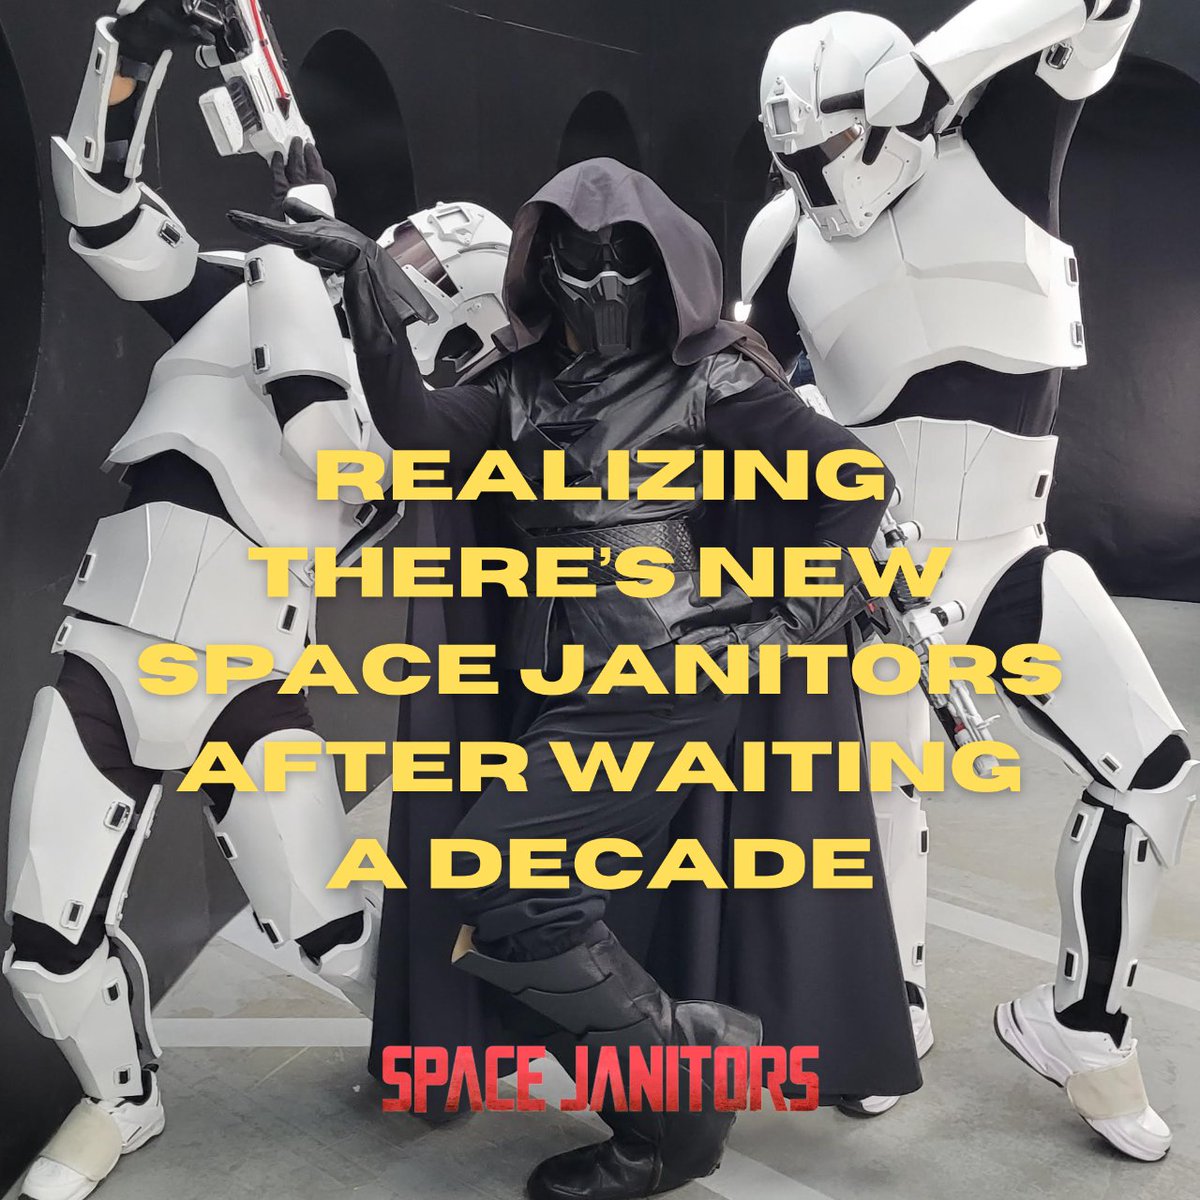 When you can't decide what to watch, may we suggest A NEW EPISODE OF #SPACEJANITORS?

Watch it now: youtube.com/watch?v=8FytLx…

New episodes drop Saturdays at 7pmEST on our YouTube channel. Finale on June 1st! ☄️

#starwars #scificomedy #starwarsinspired